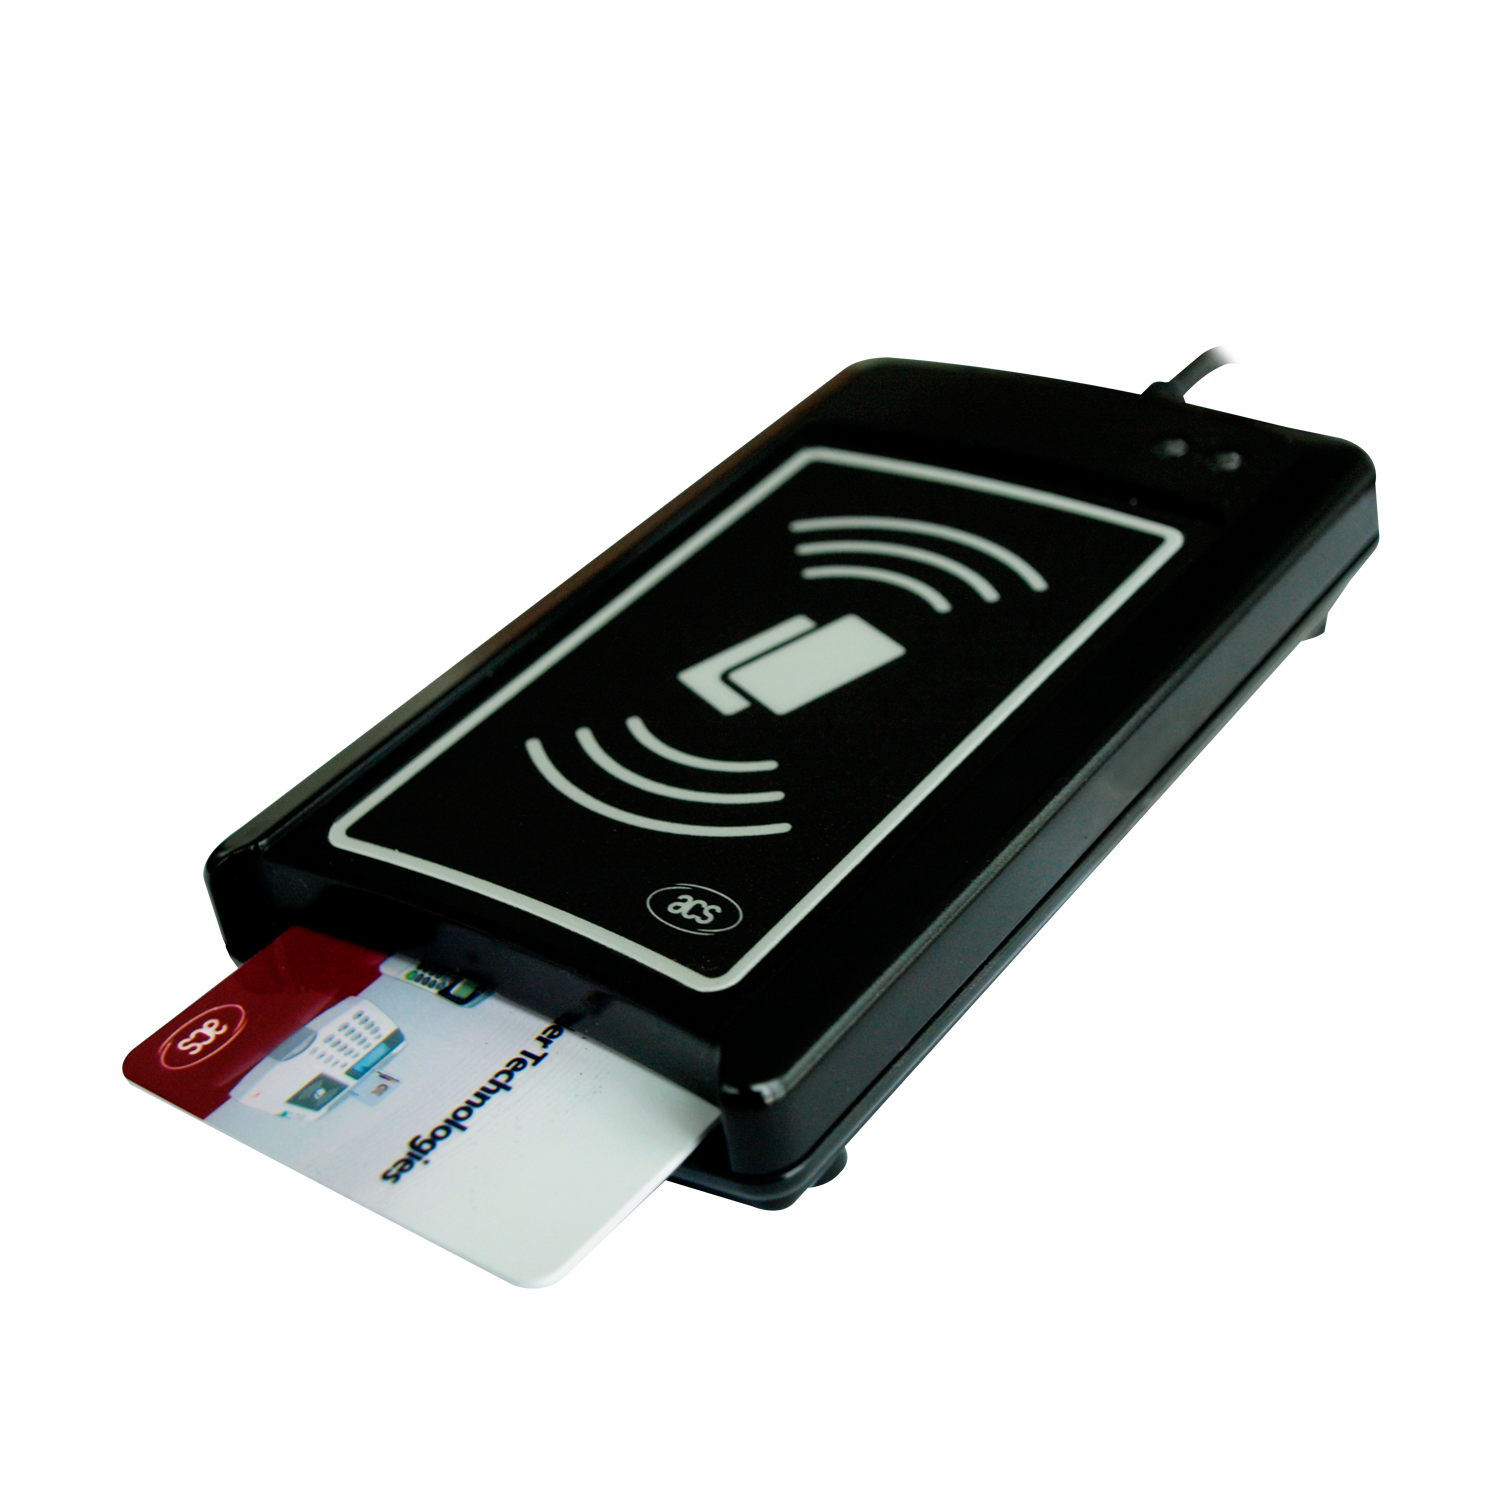 Full USB Speed 12Mbps Support ISO14443A&ISO18092 Smart Card Reader - ACR1281U